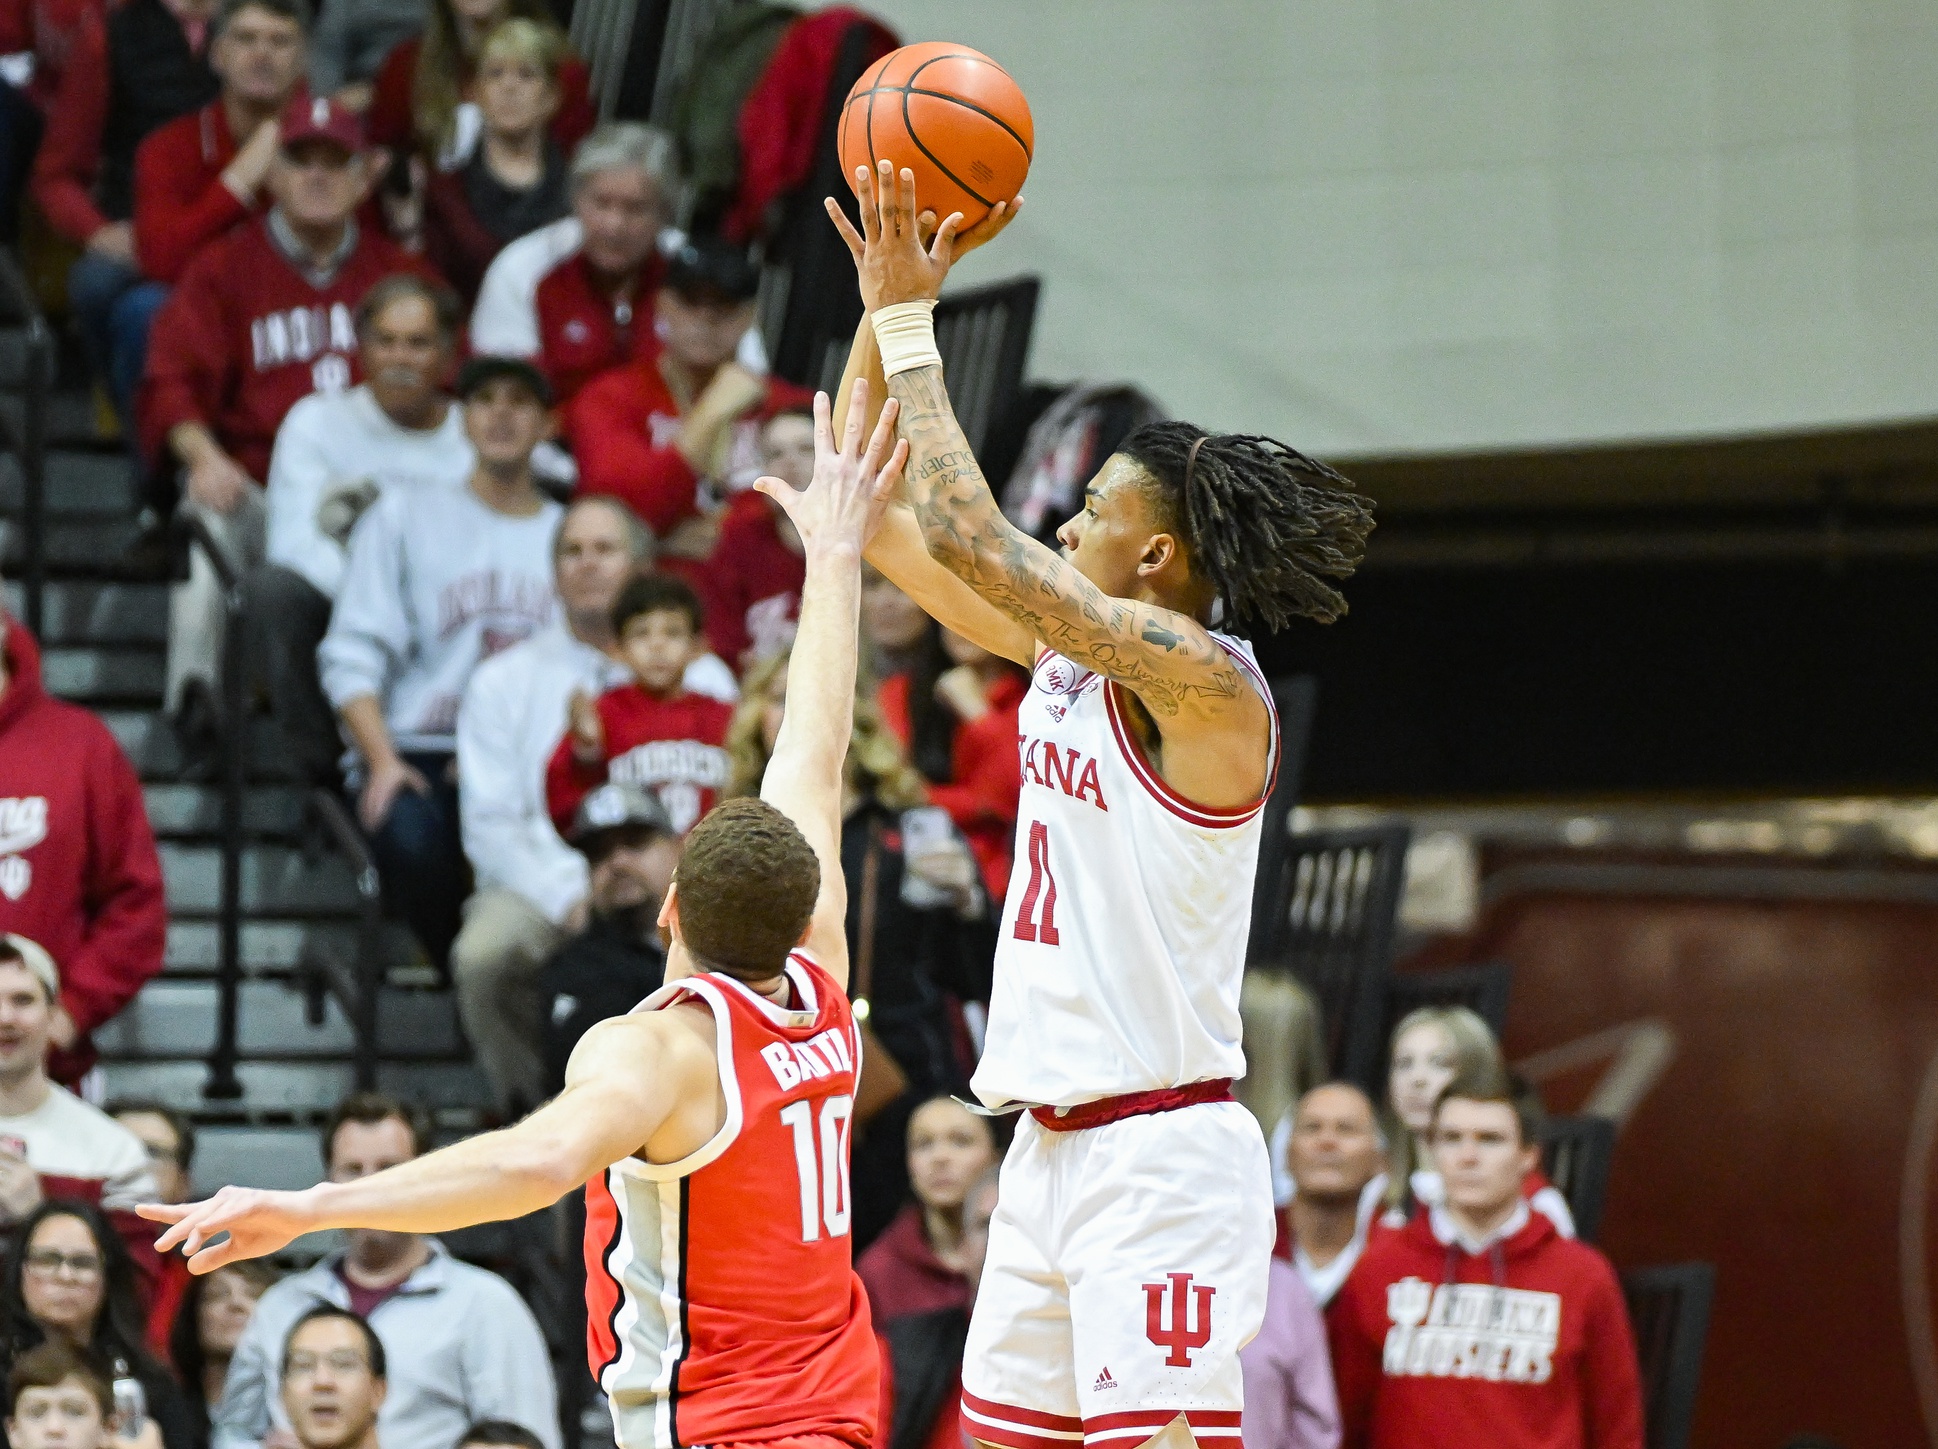 Indiana Hoosiers guard CJ Gunn (11) makes a three-point basket over Ohio State Buckeyes forward Jamison Battle (10) during the second half at Simon Skjodt Assembly Hall.